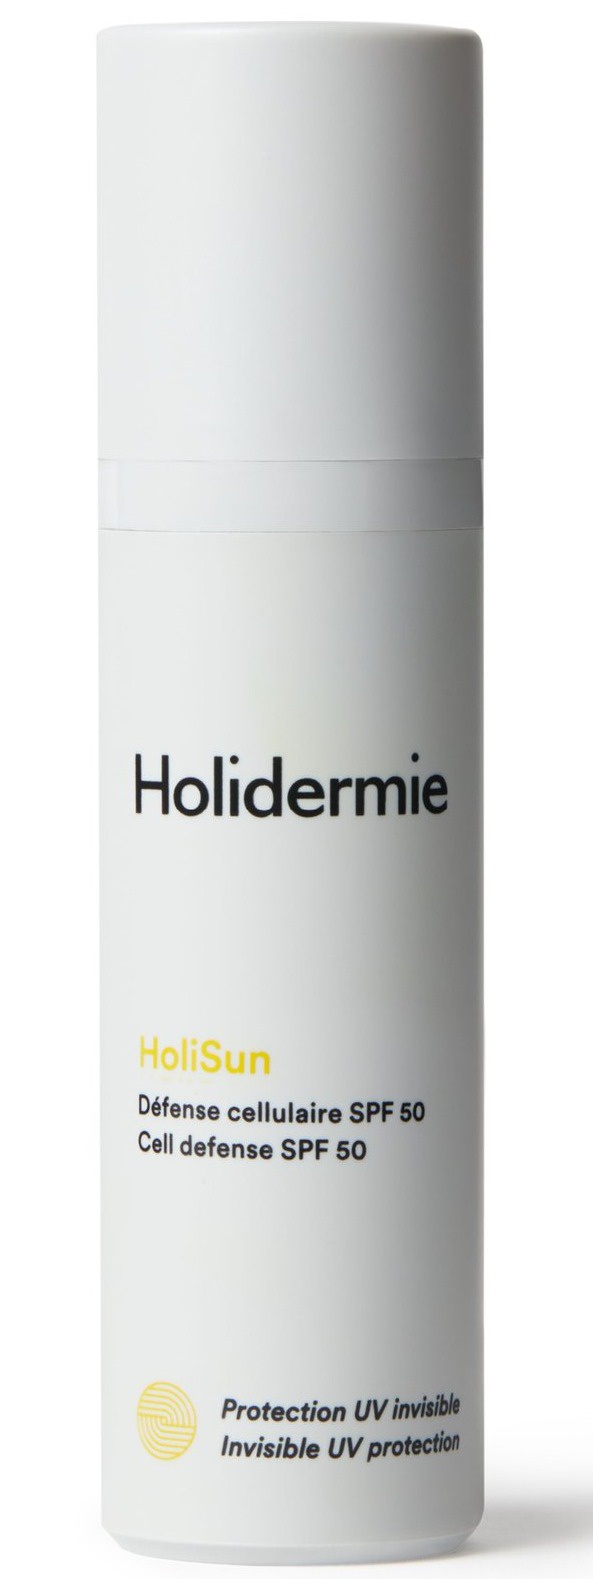 Holidermie Cell Defense SPF 50